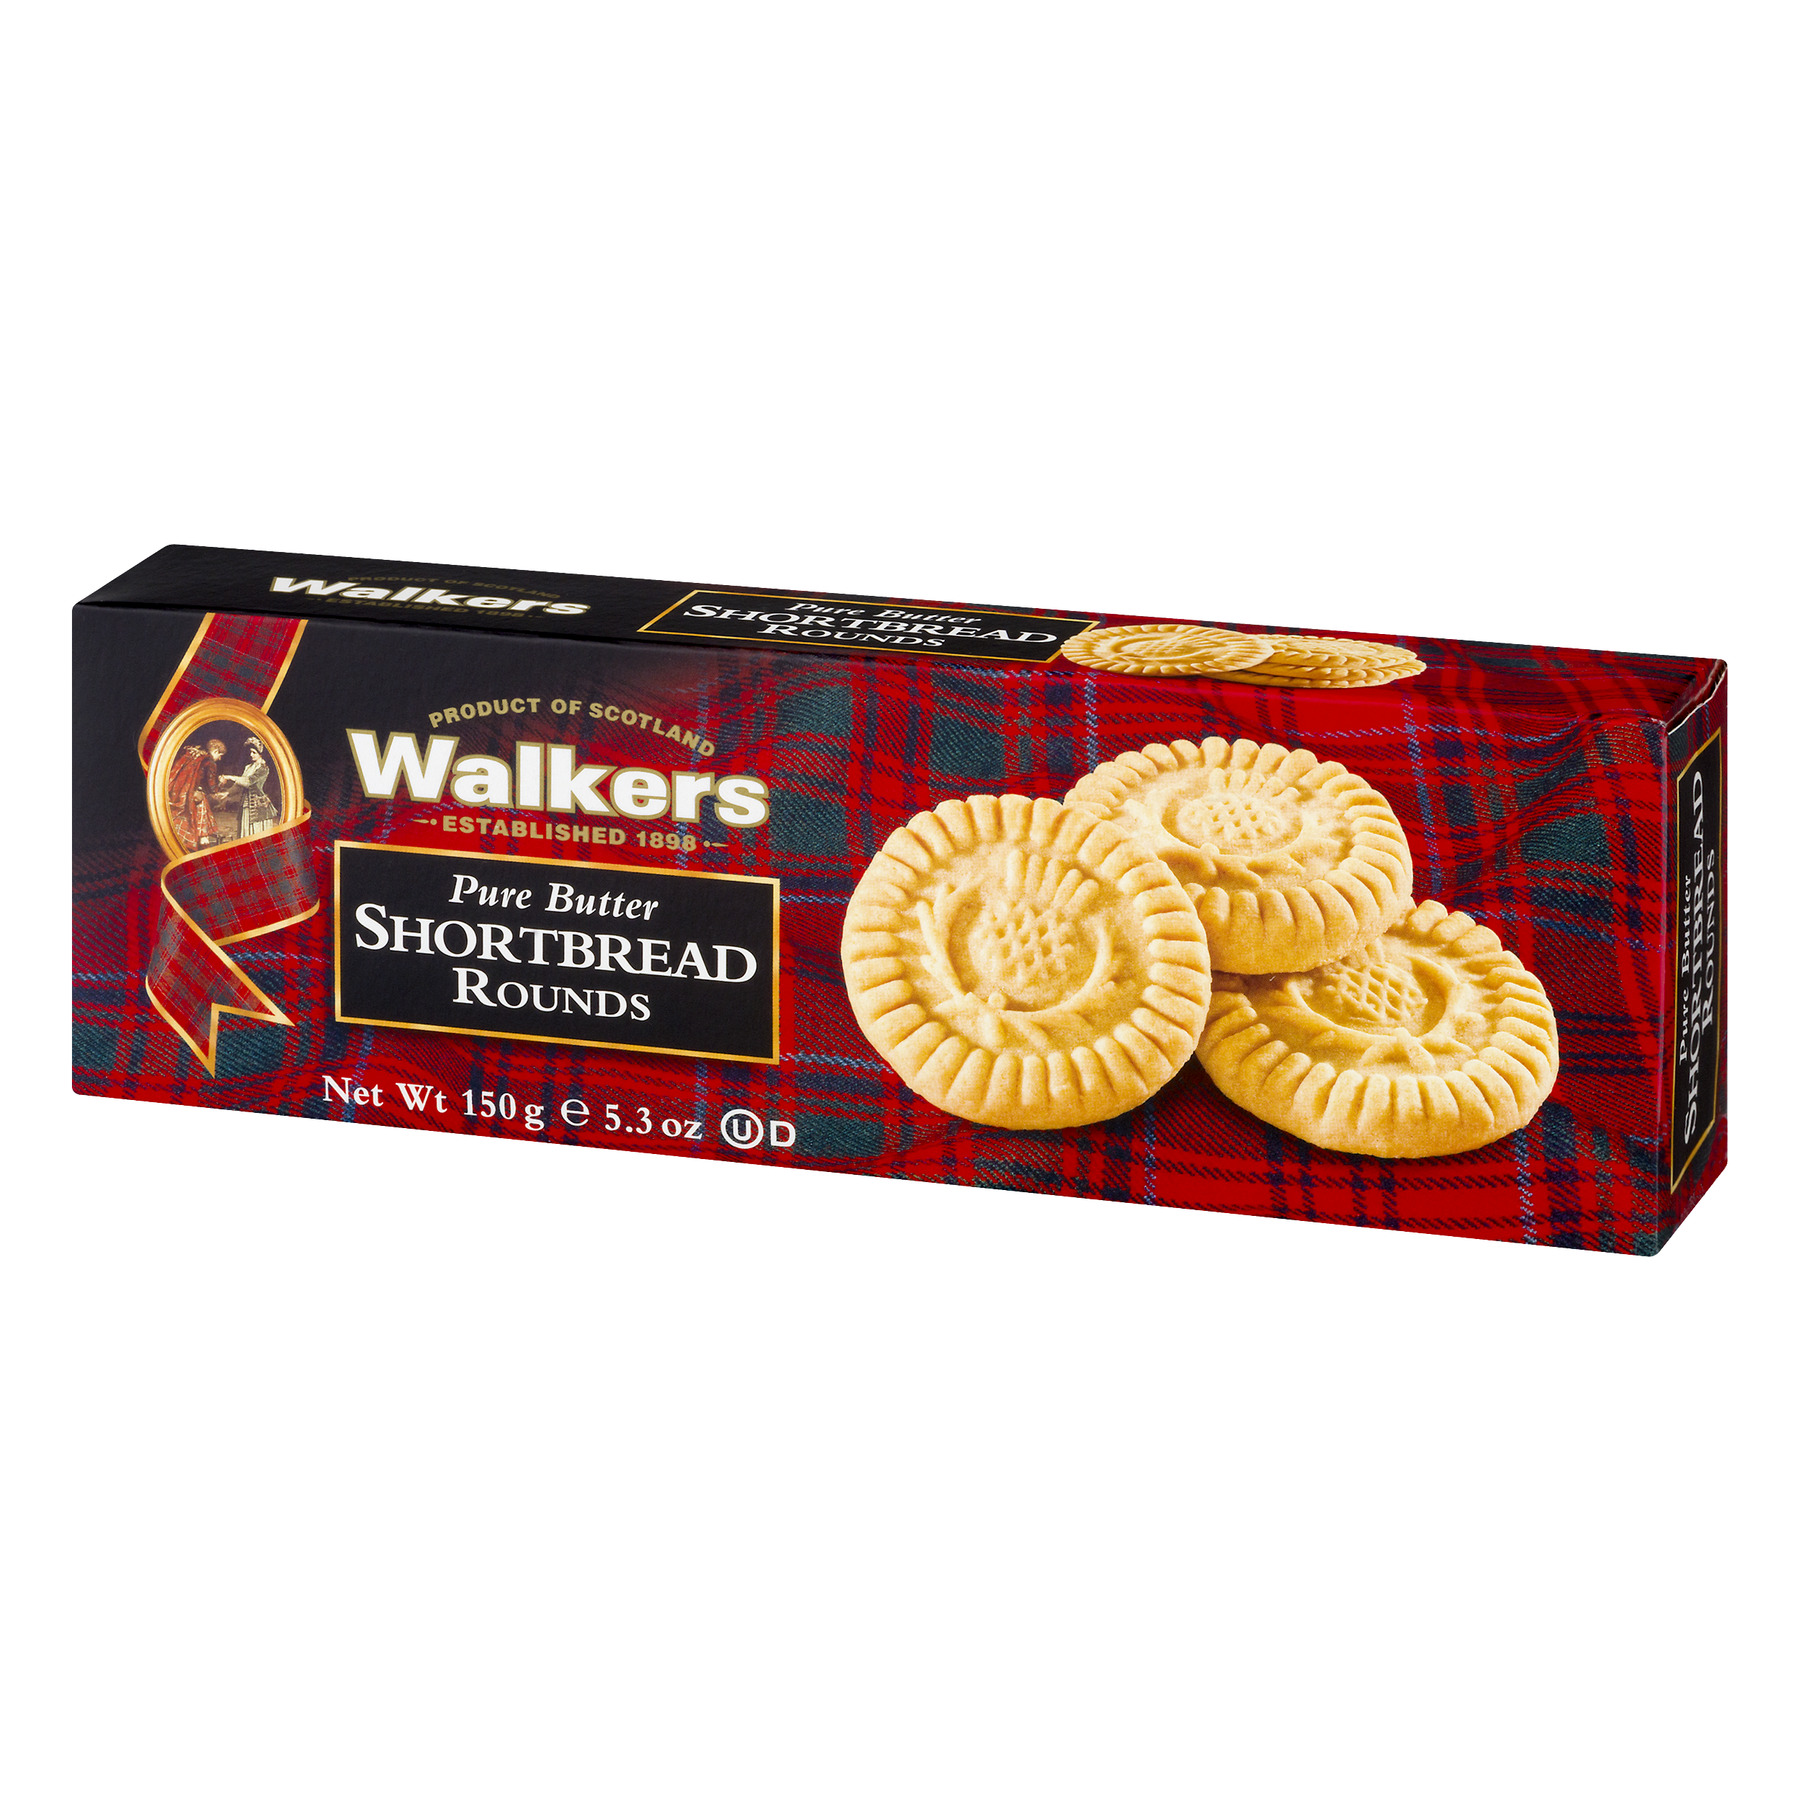 Walkers Pure Butter Shortbread Rounds, 5.3 Oz. - image 3 of 7